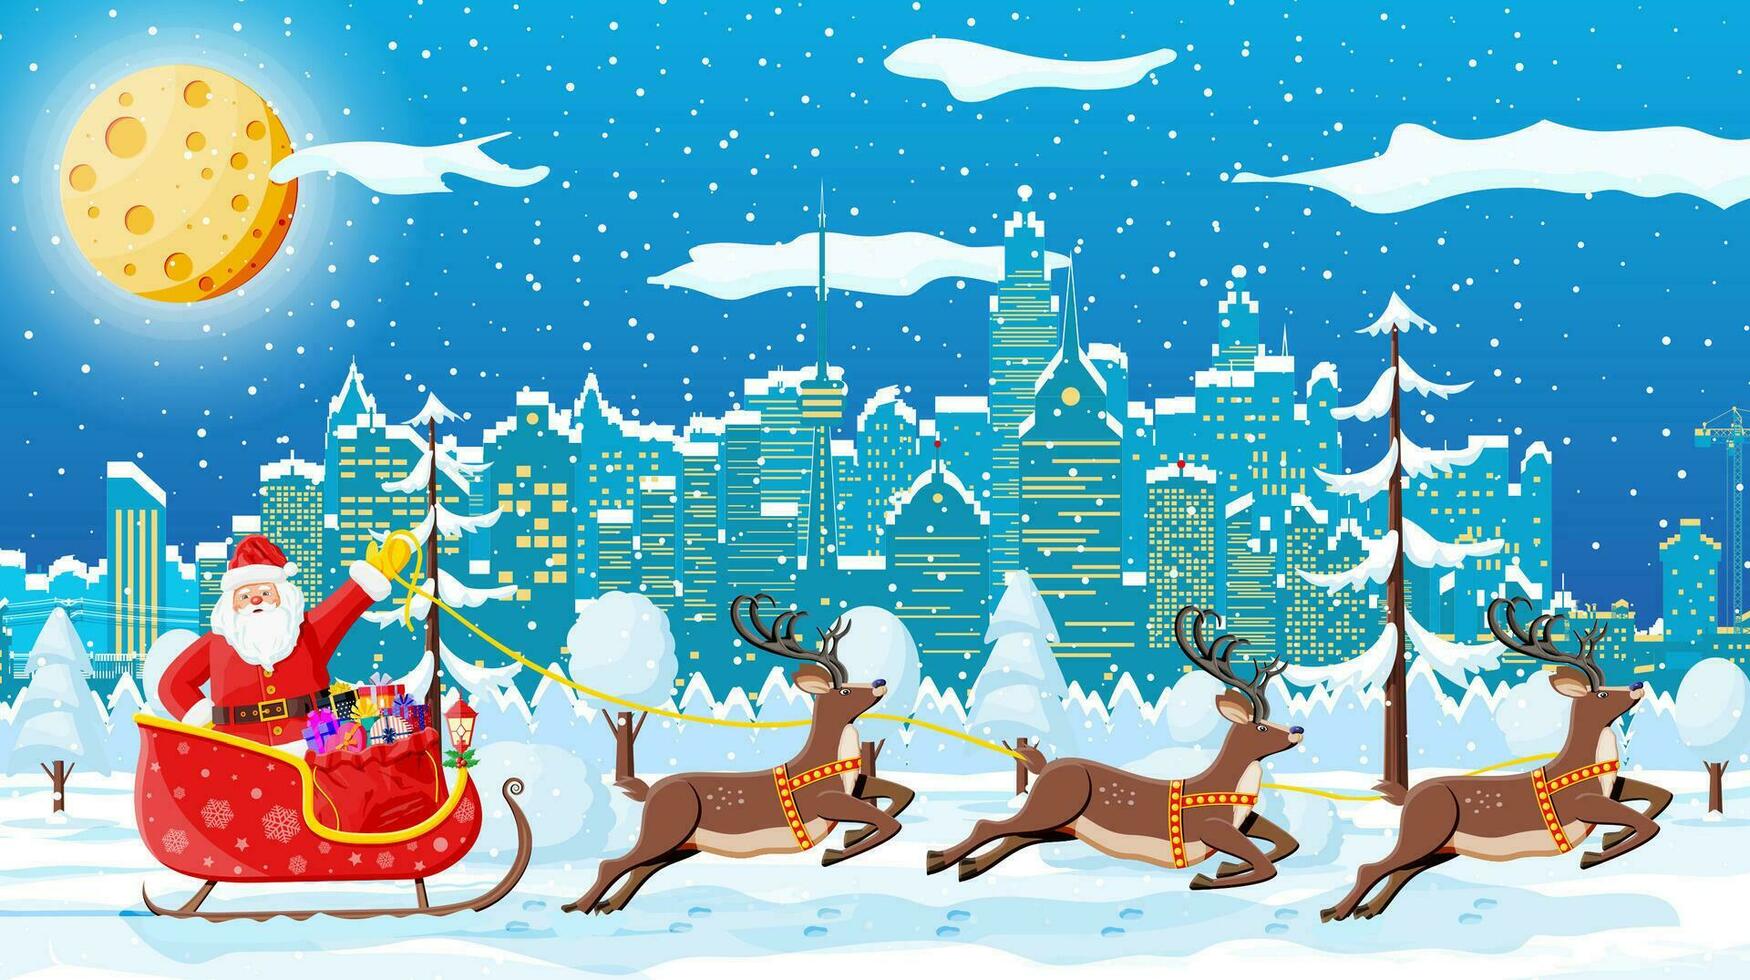 Santa claus rides reindeer sleigh. Christmas winter cityscape, snowflakes and trees. Happy new year decoration. Merry christmas holiday. New year and xmas celebration. Vector illustration flat style